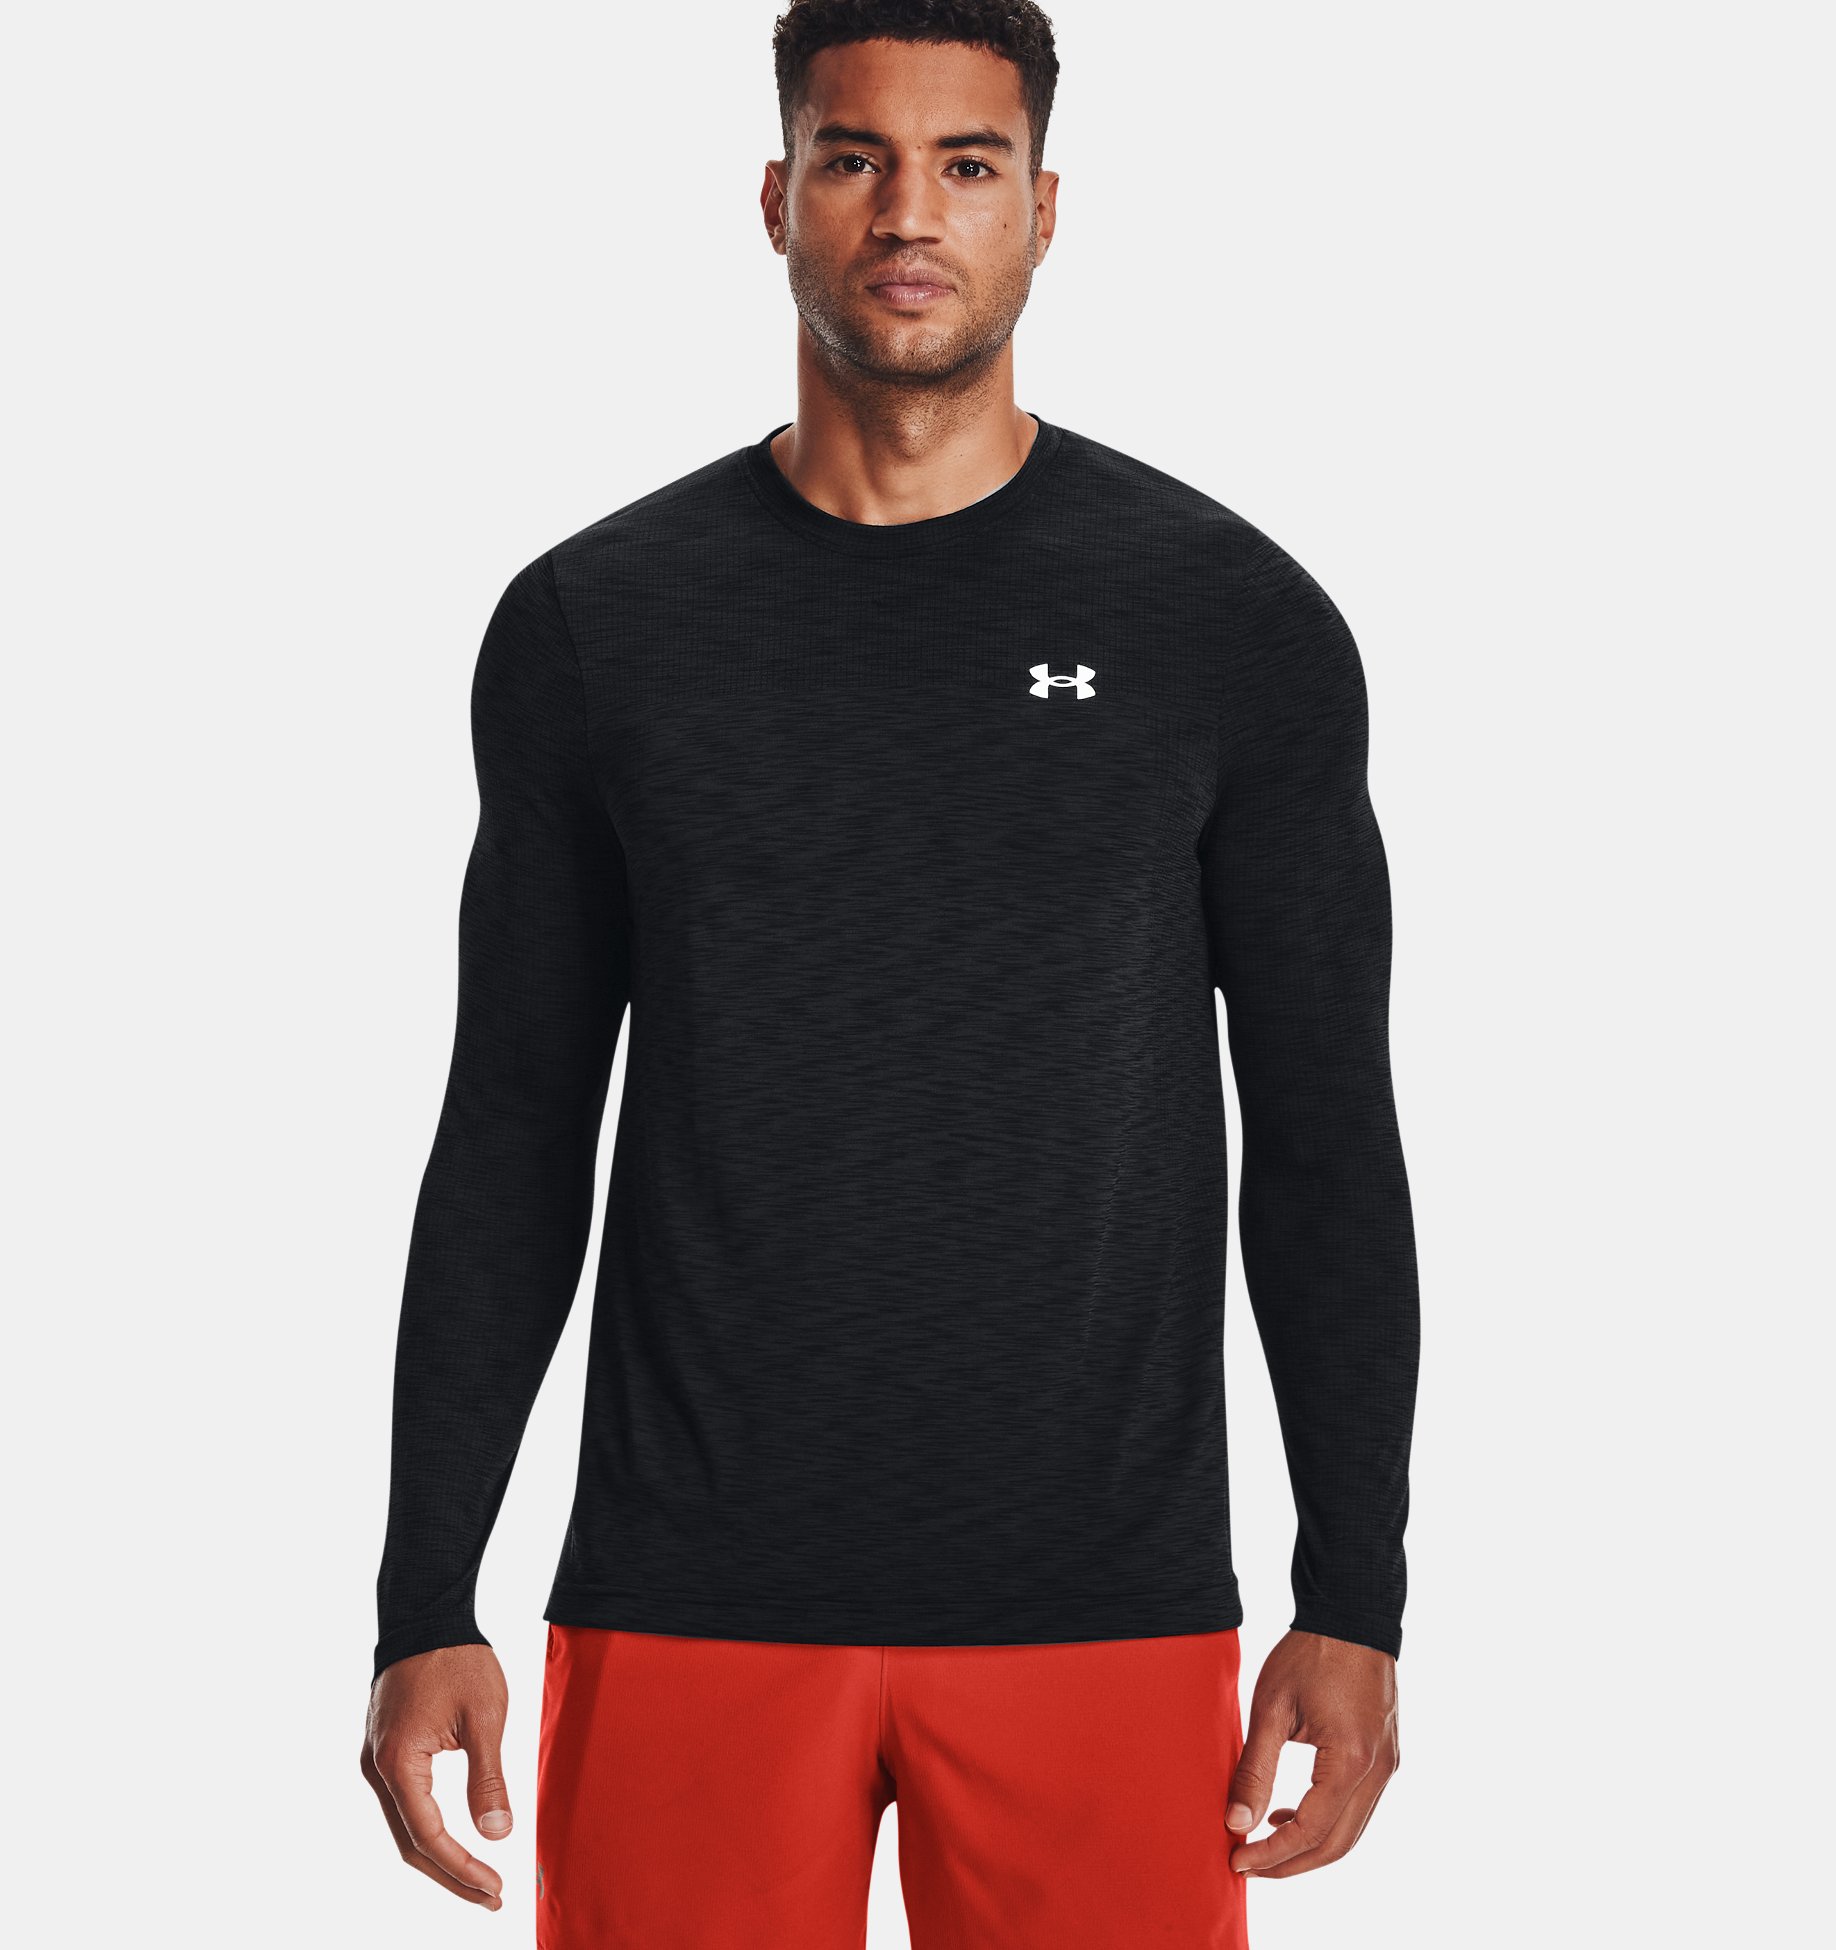 Under Armour Mens Seamless Longsleeve Comfortable Long-Sleeved top Quick-Drying Running Apparel with Seamless Construction and Anti-Odour Technology 